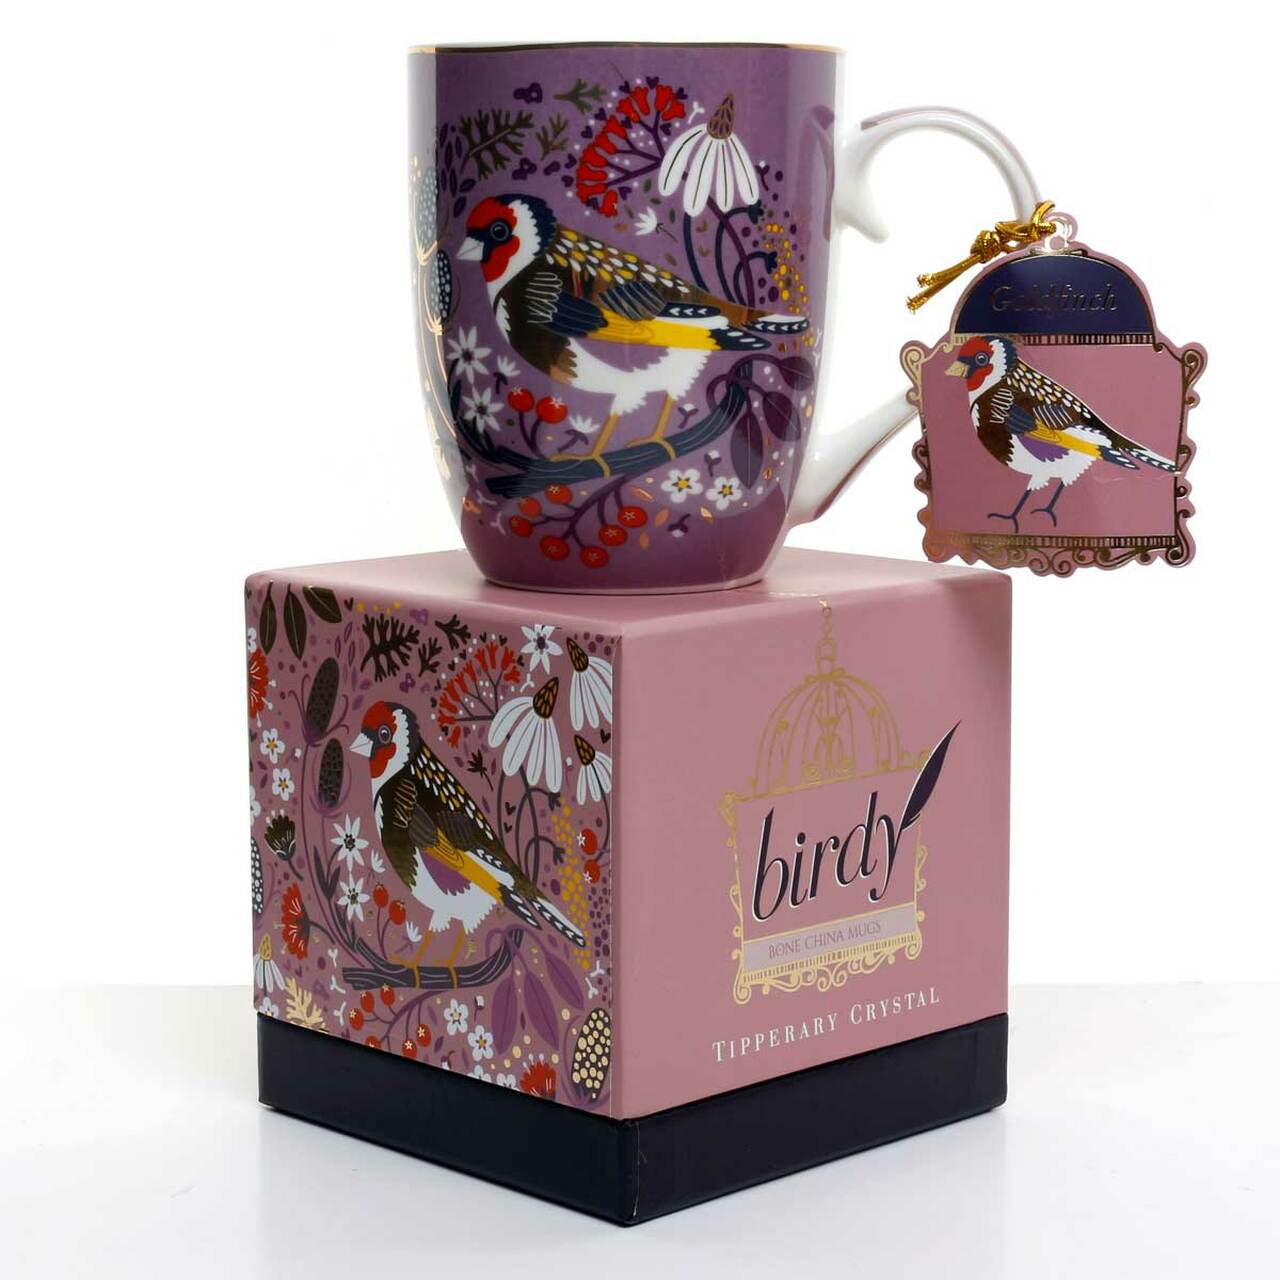 Tipperary Goldfinch Single Birdy Mug  New to our, these individual mugs come beautifully illustrated and presented in a rigid Tipperary Crystal gift box. Makes a wonderful gift to be enjoyed over a peaceful cup of their favourite beverage.